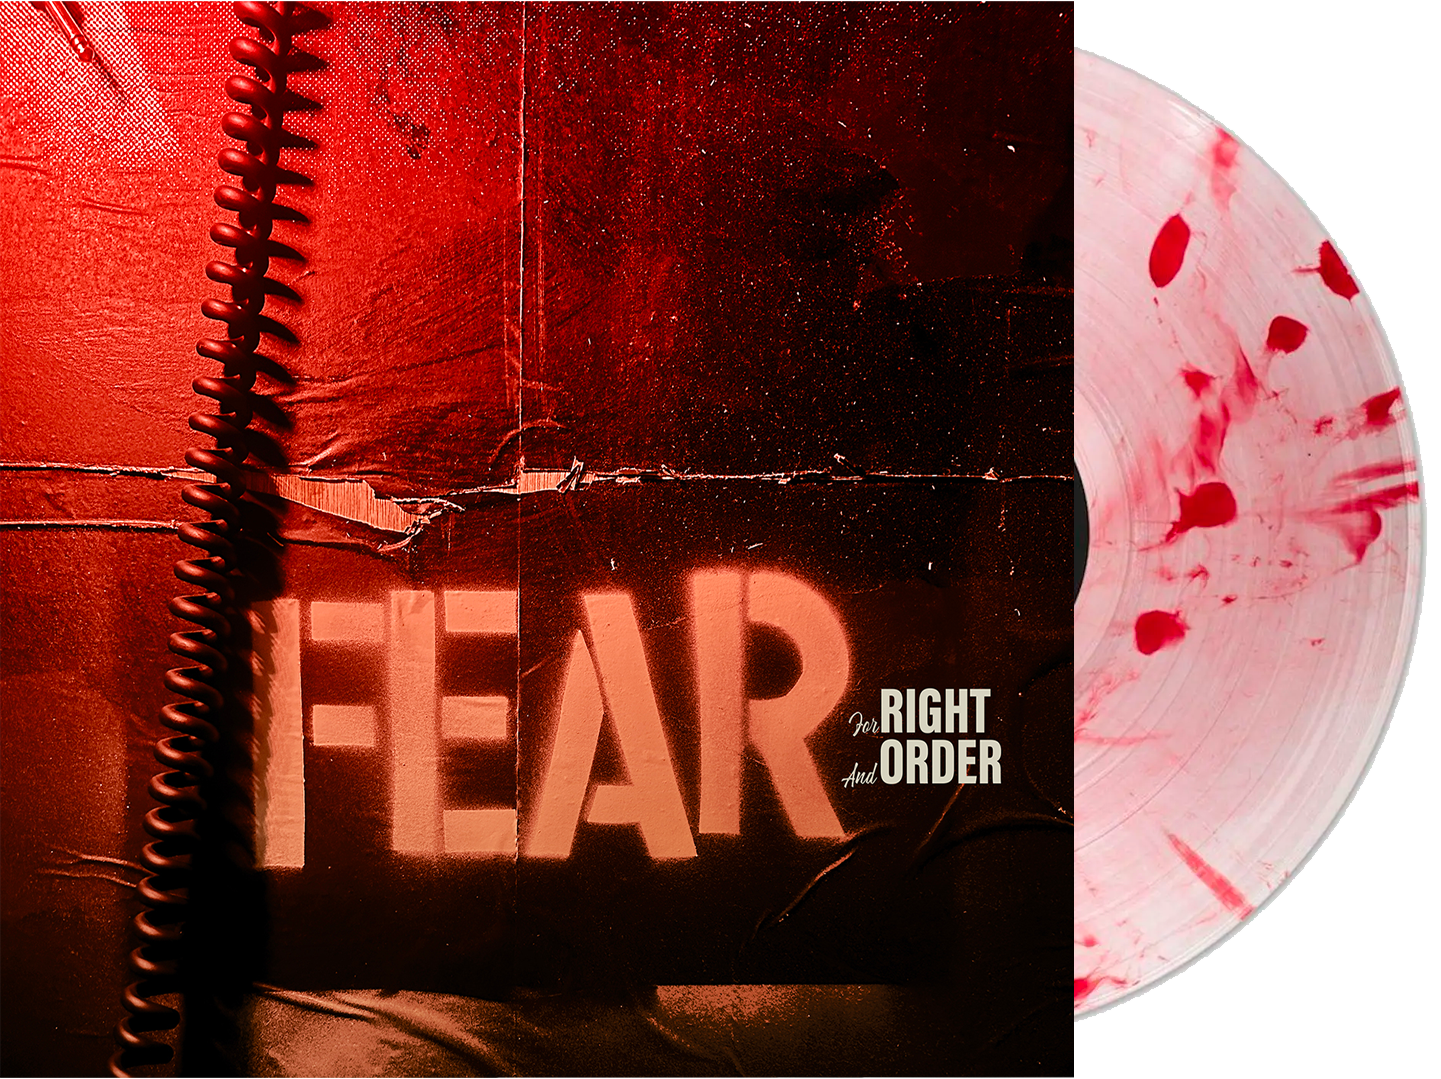 FEAR "FOR RIGHT AND ORDER" LIMITED EDITION RED / BONE WHITE / CLEAR SPLATTER  VINYL LP -  PRE-ORDER EDITION OF 100 PCS